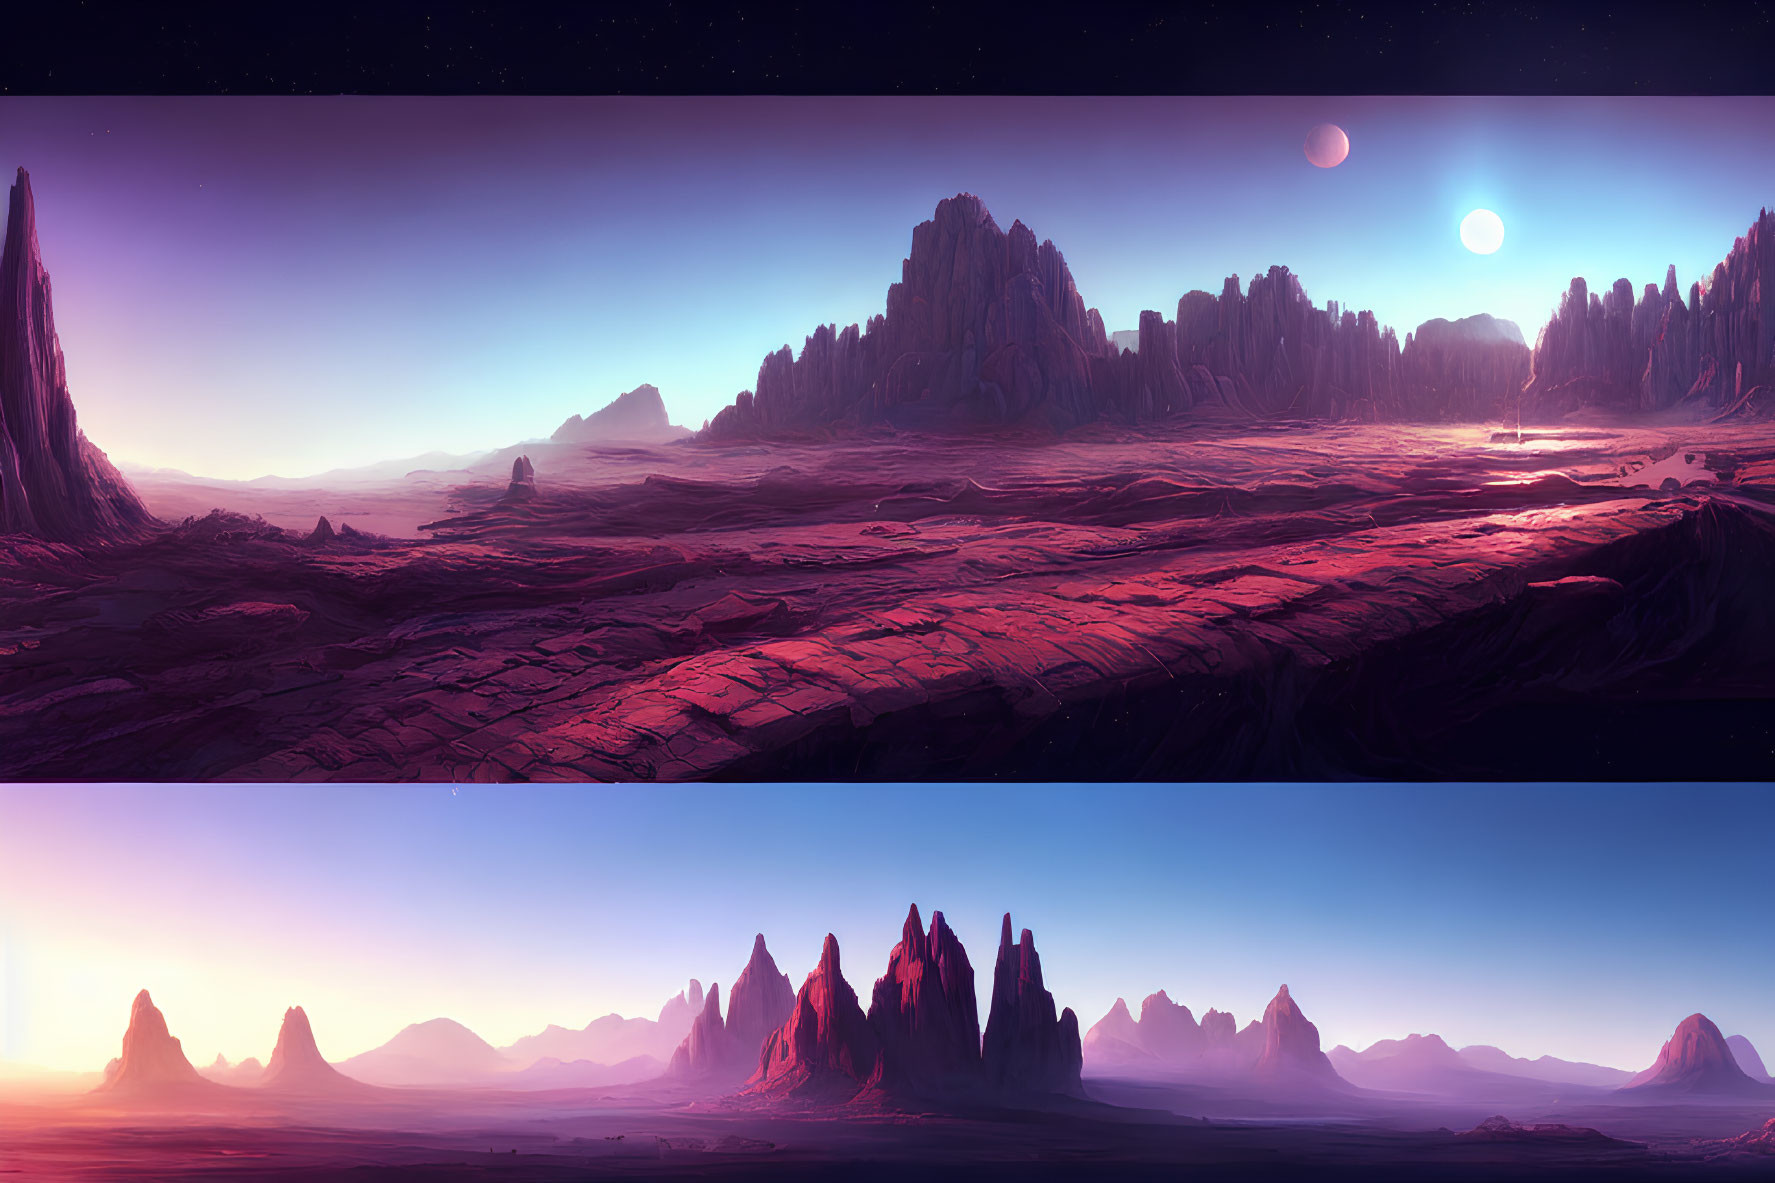 Alien landscape with rock formations, dual moons, and vibrant sky